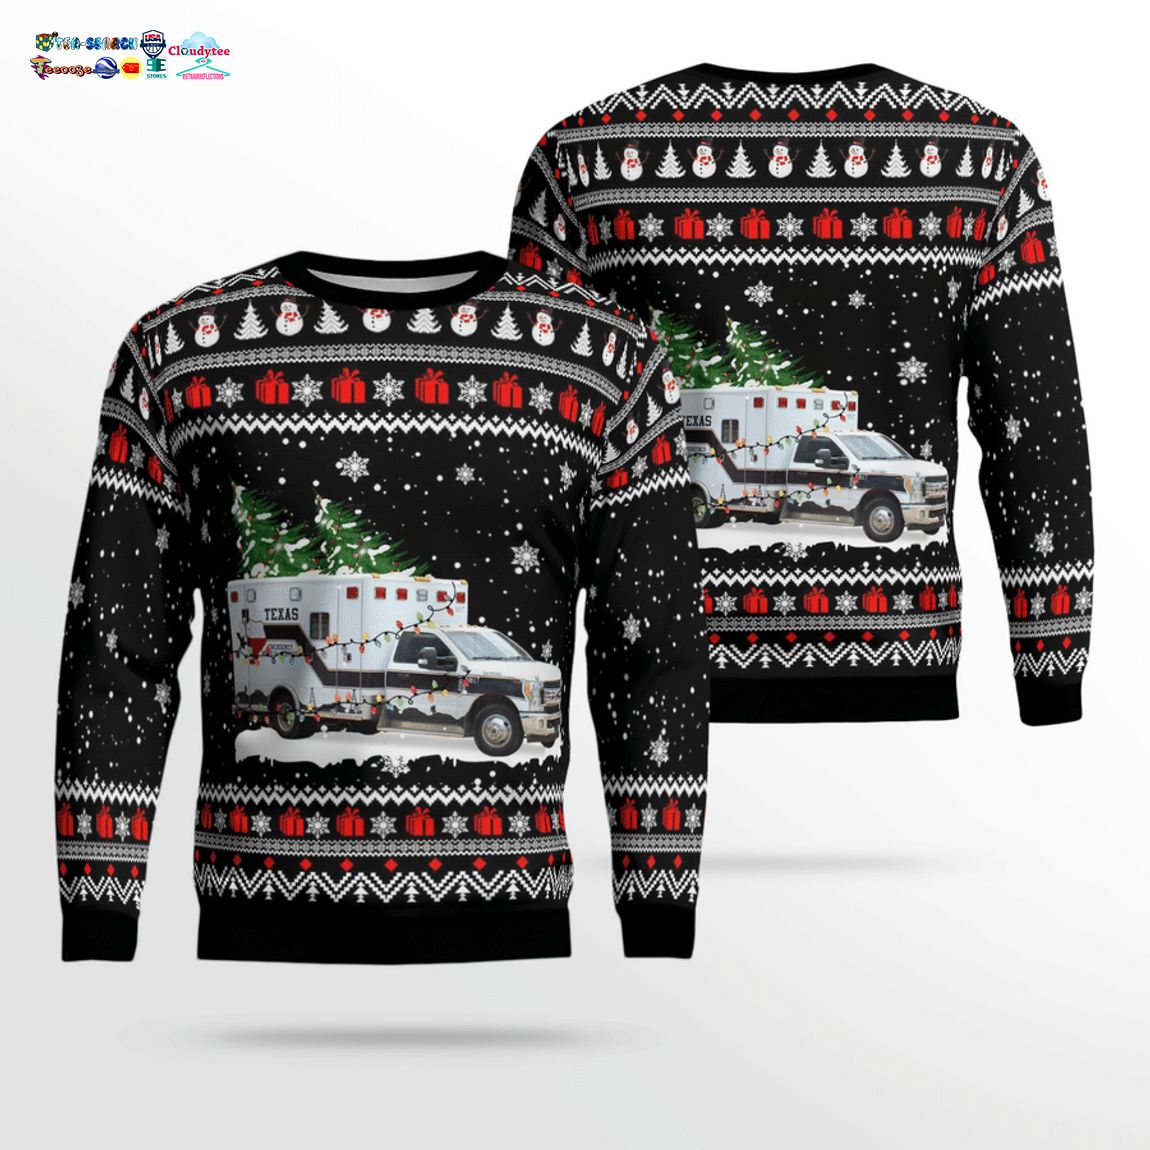 Texas EMS 3D Christmas Sweater - You look insane in the picture, dare I say